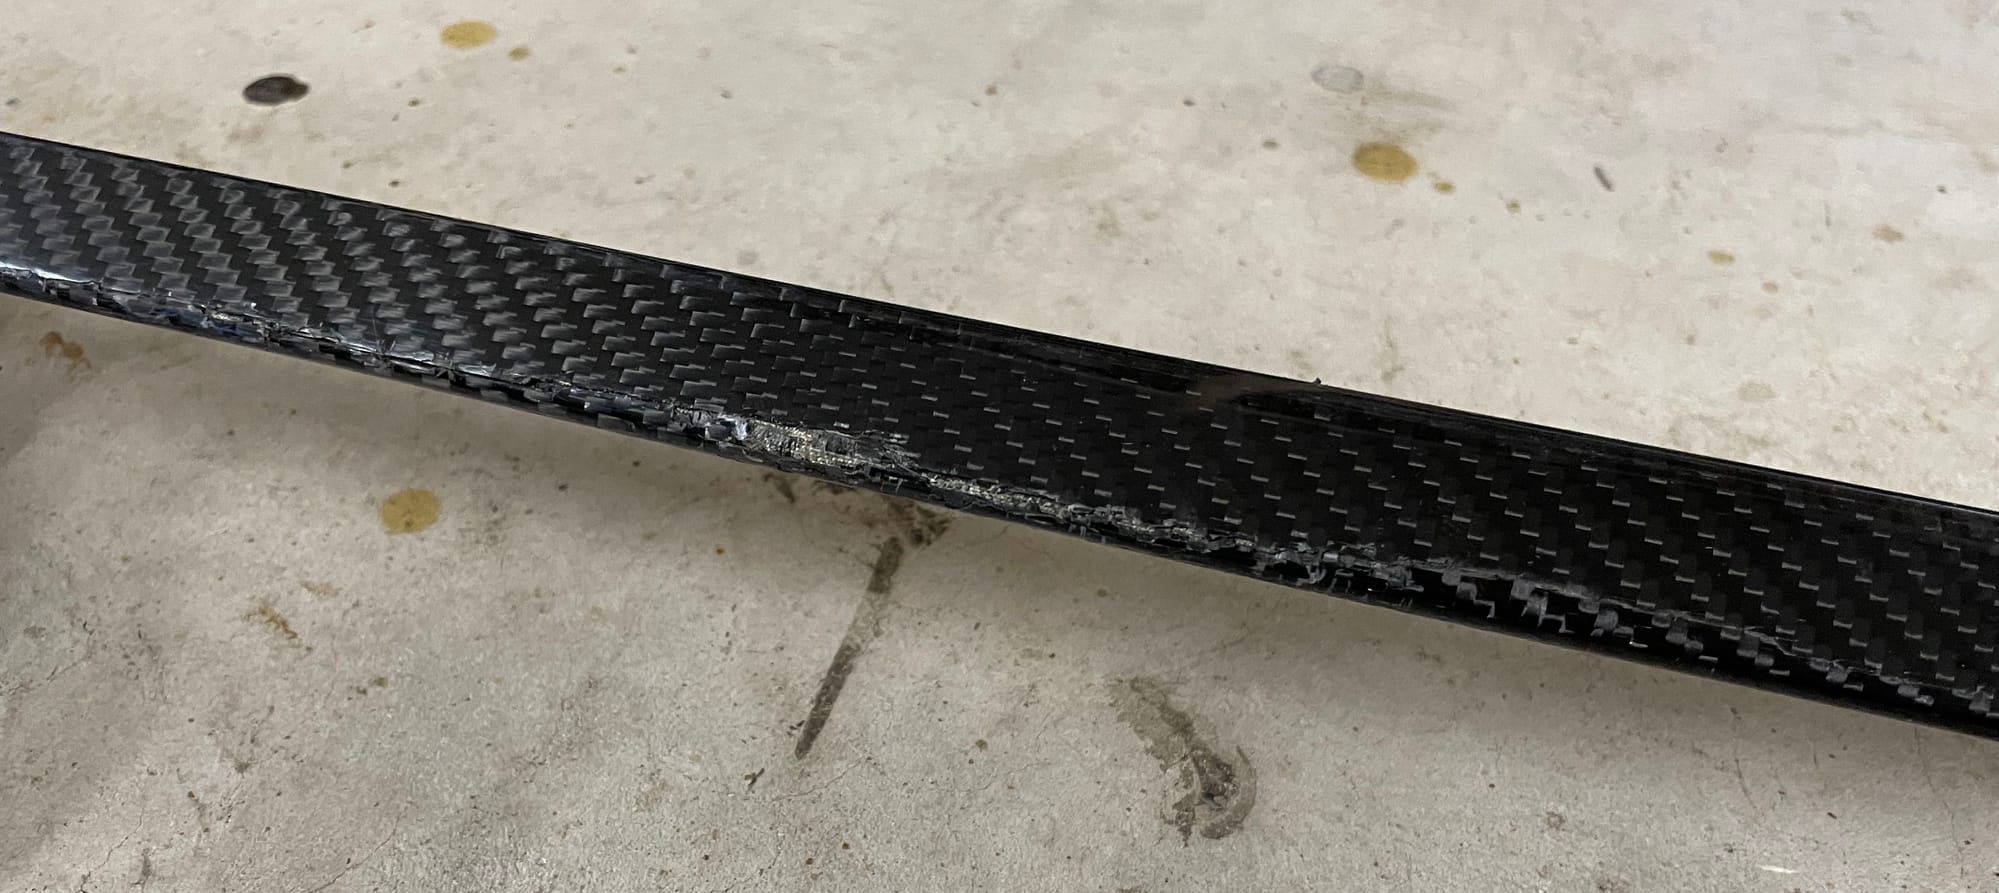 Exterior Body Parts - 2018+ E63 carbon fiber sideskirt trim (right side only, some damage) - Used - 2018 to 2020 Mercedes-Benz E63 AMG - 2018 to 2020 Mercedes-Benz E63 AMG S - Portland, OR 97229, United States